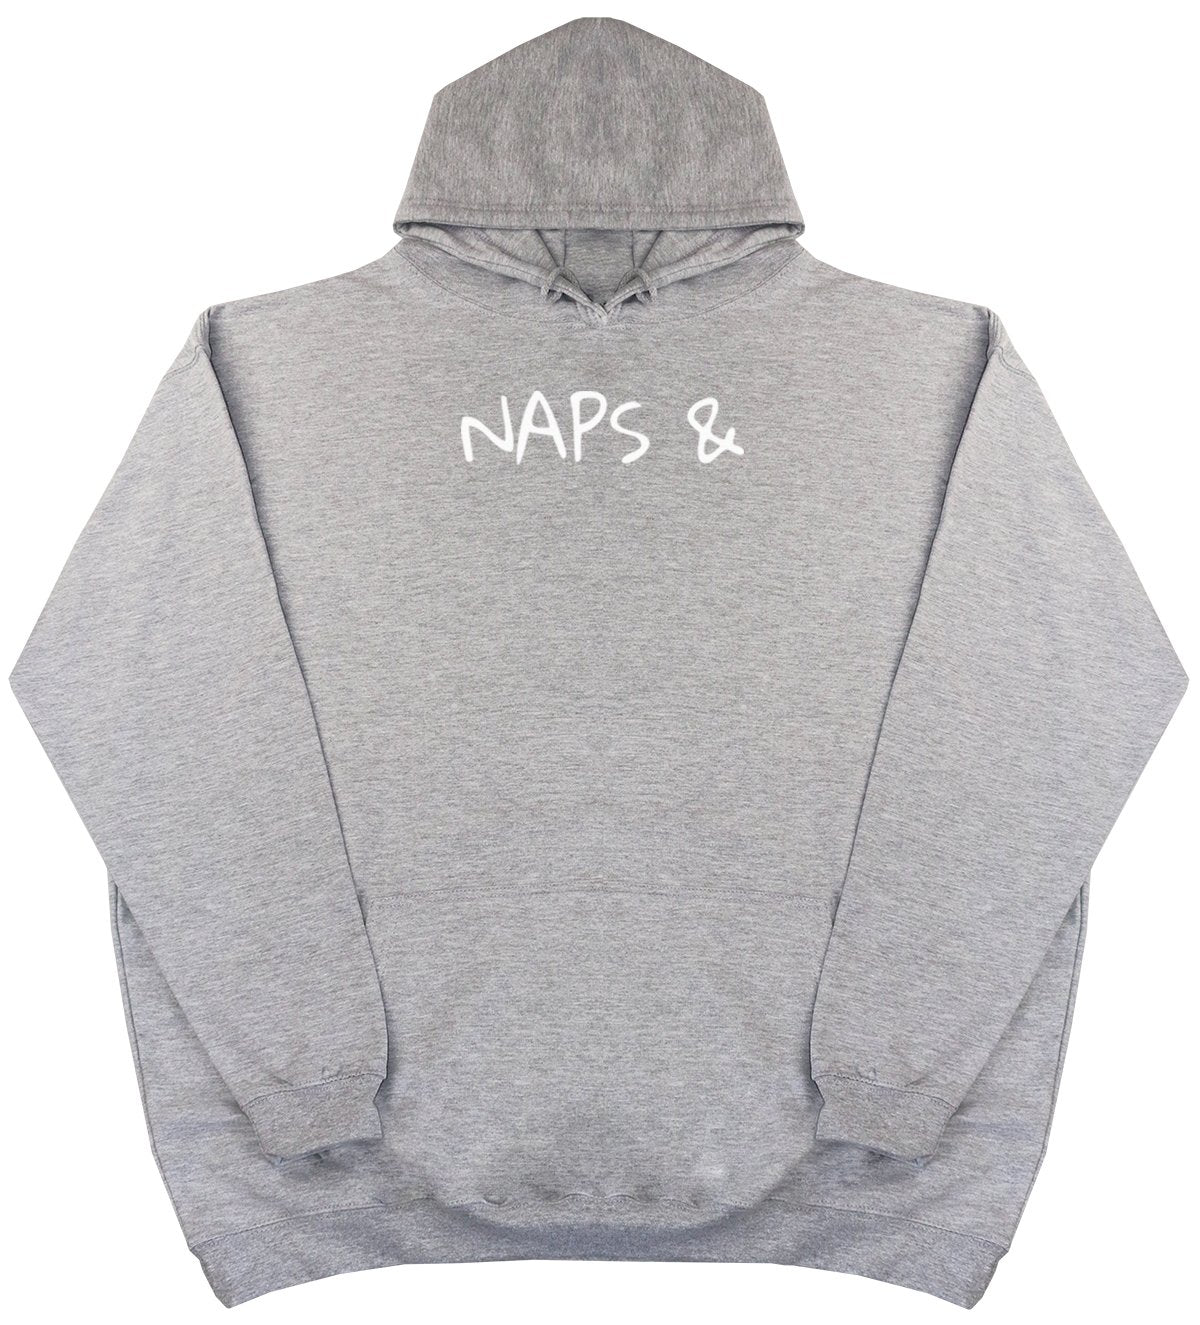 PERSONALISED Naps & - New Style - Huge Size - Oversized Comfy Hoody